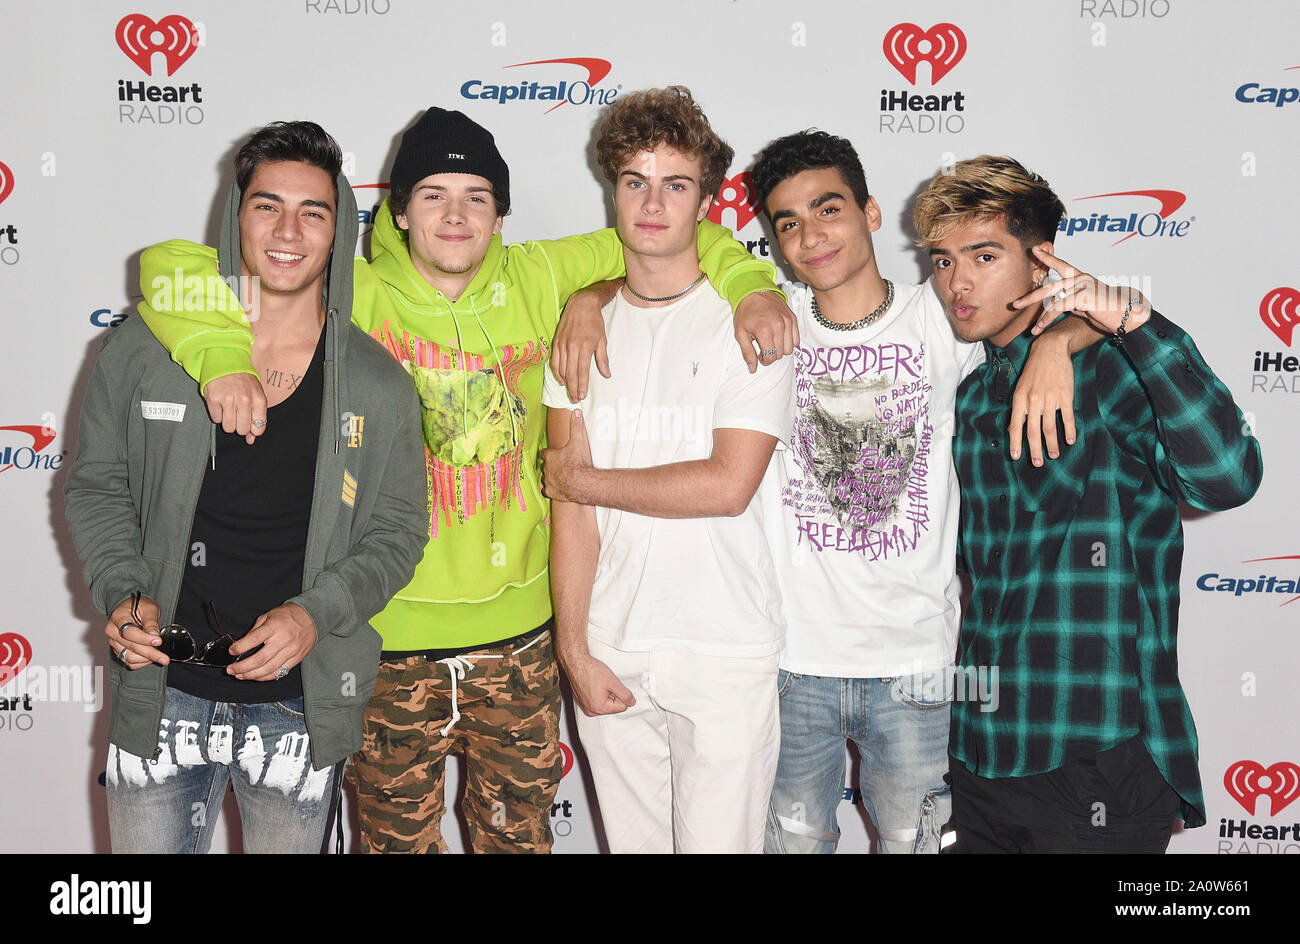 LAS VEGAS, NV - SEPTEMBER 21: Brady Tutton, Sergio Calderon, Drew Ramos, Chance Perez and Michael Conor of In Real Life attend the iHeartRadio Music Festival at T-Mobile Arena on September 21, 2019 in Las Vegas, Nevada. Photo: imageSPACE/MediaPunch Stock Photo